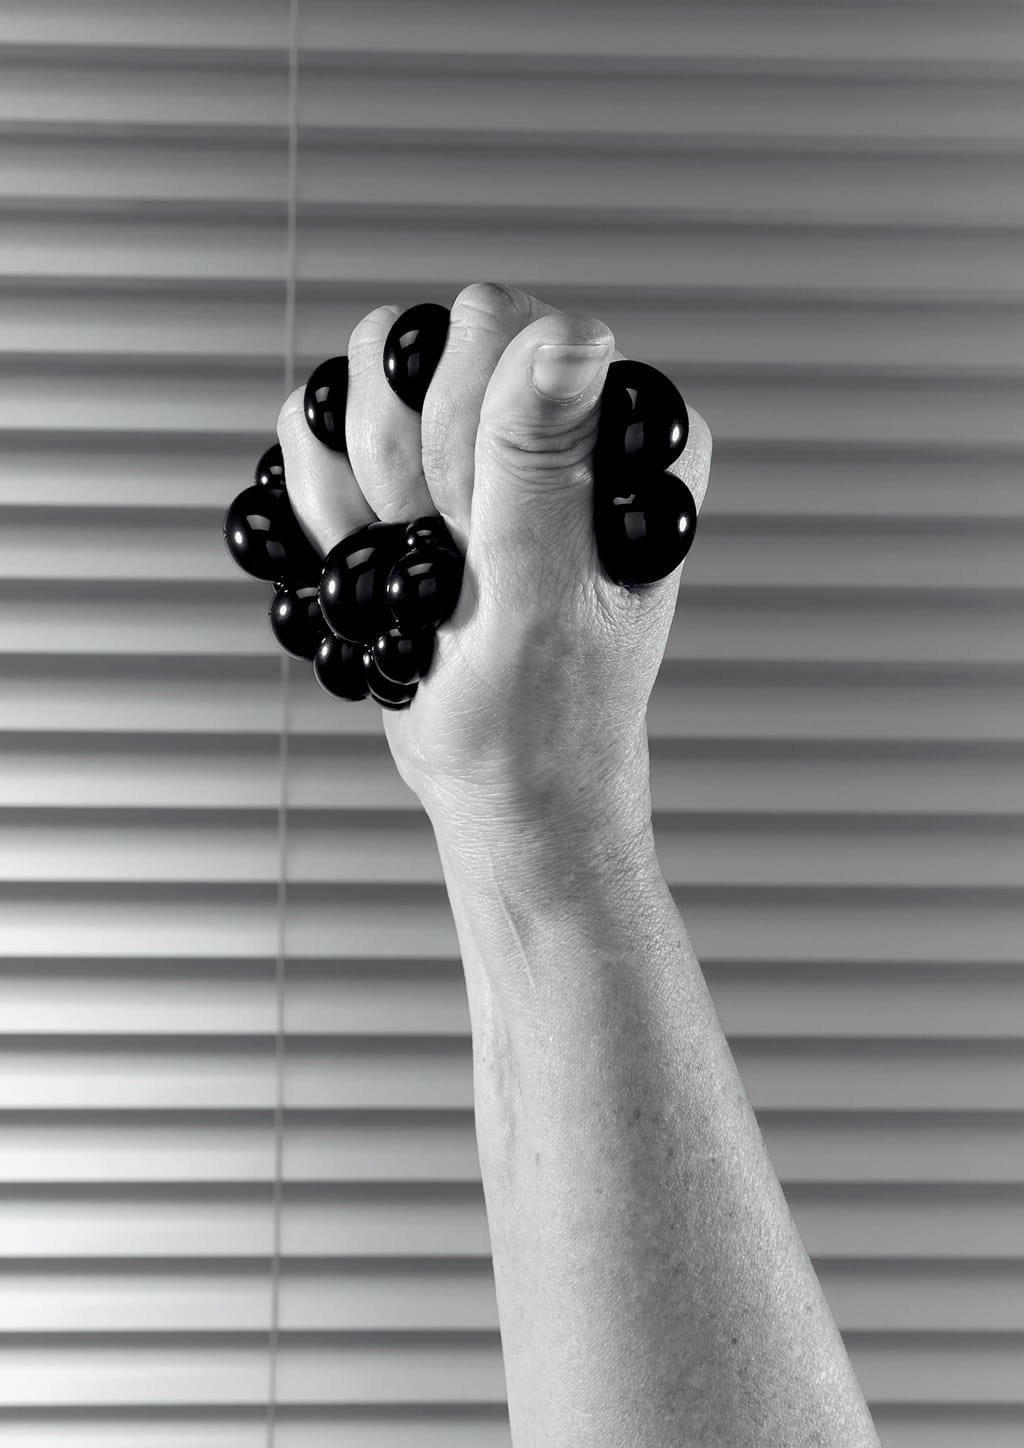 Black and white photograph of a hand squeezing a black thing.